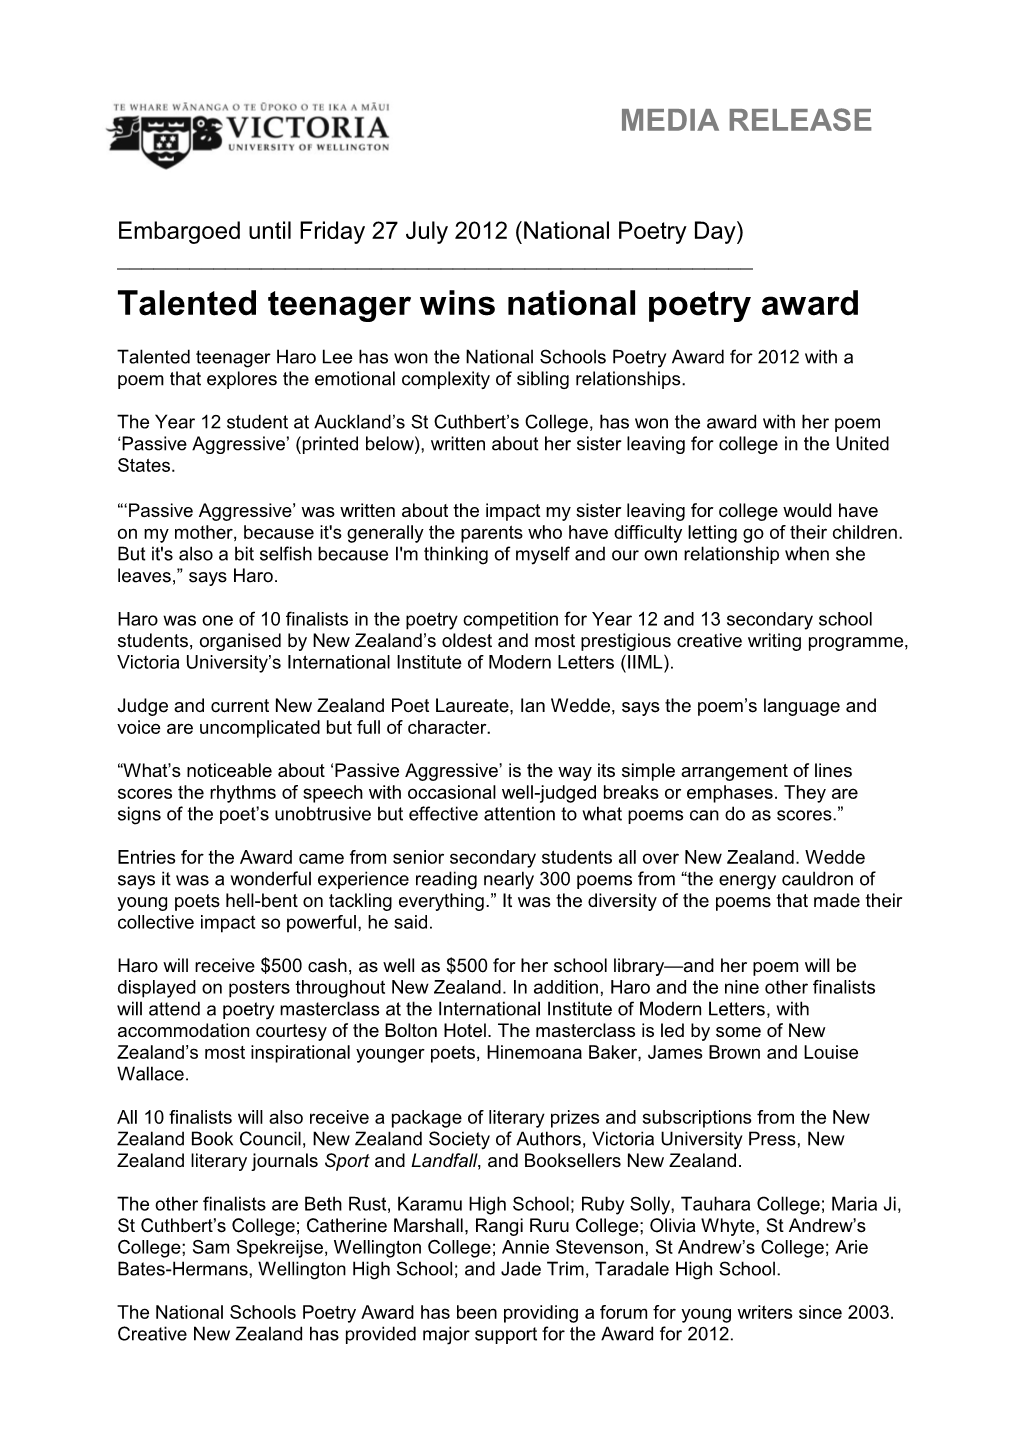 Talented Teenager Wins National Poetry Award